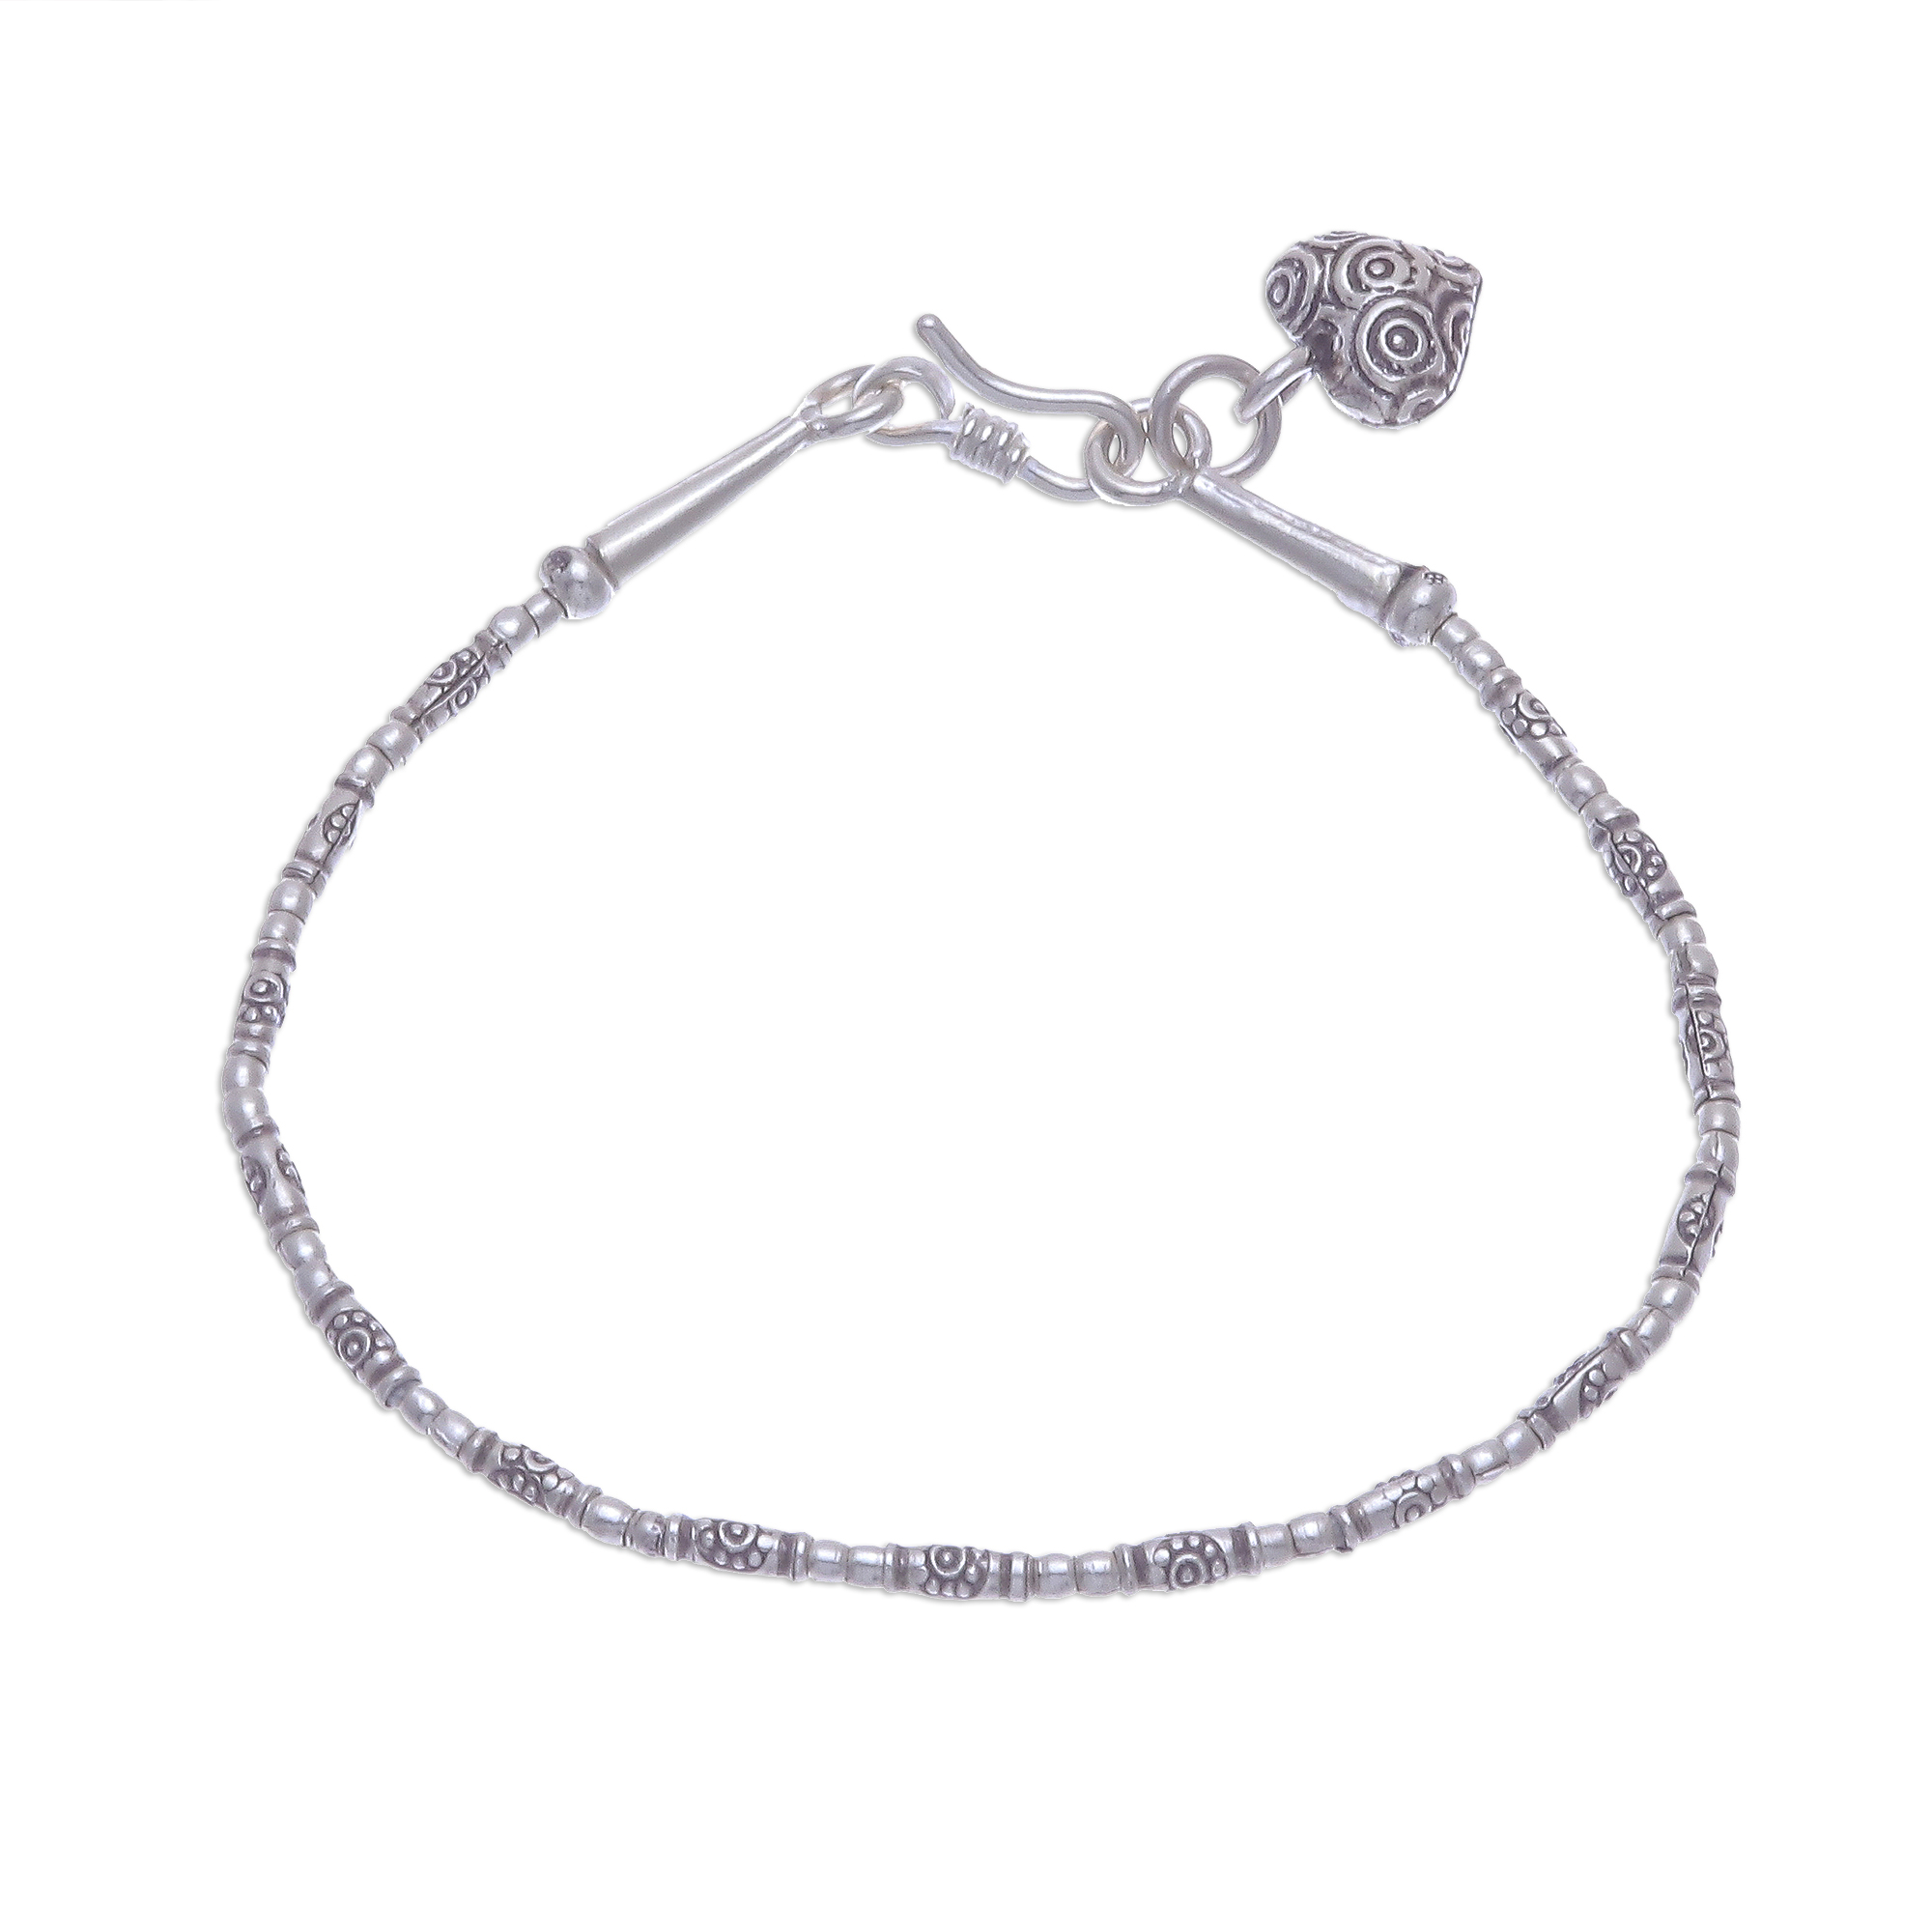 Honest Heart,'Silver Link Bracelet with Heart Charm from Thailand